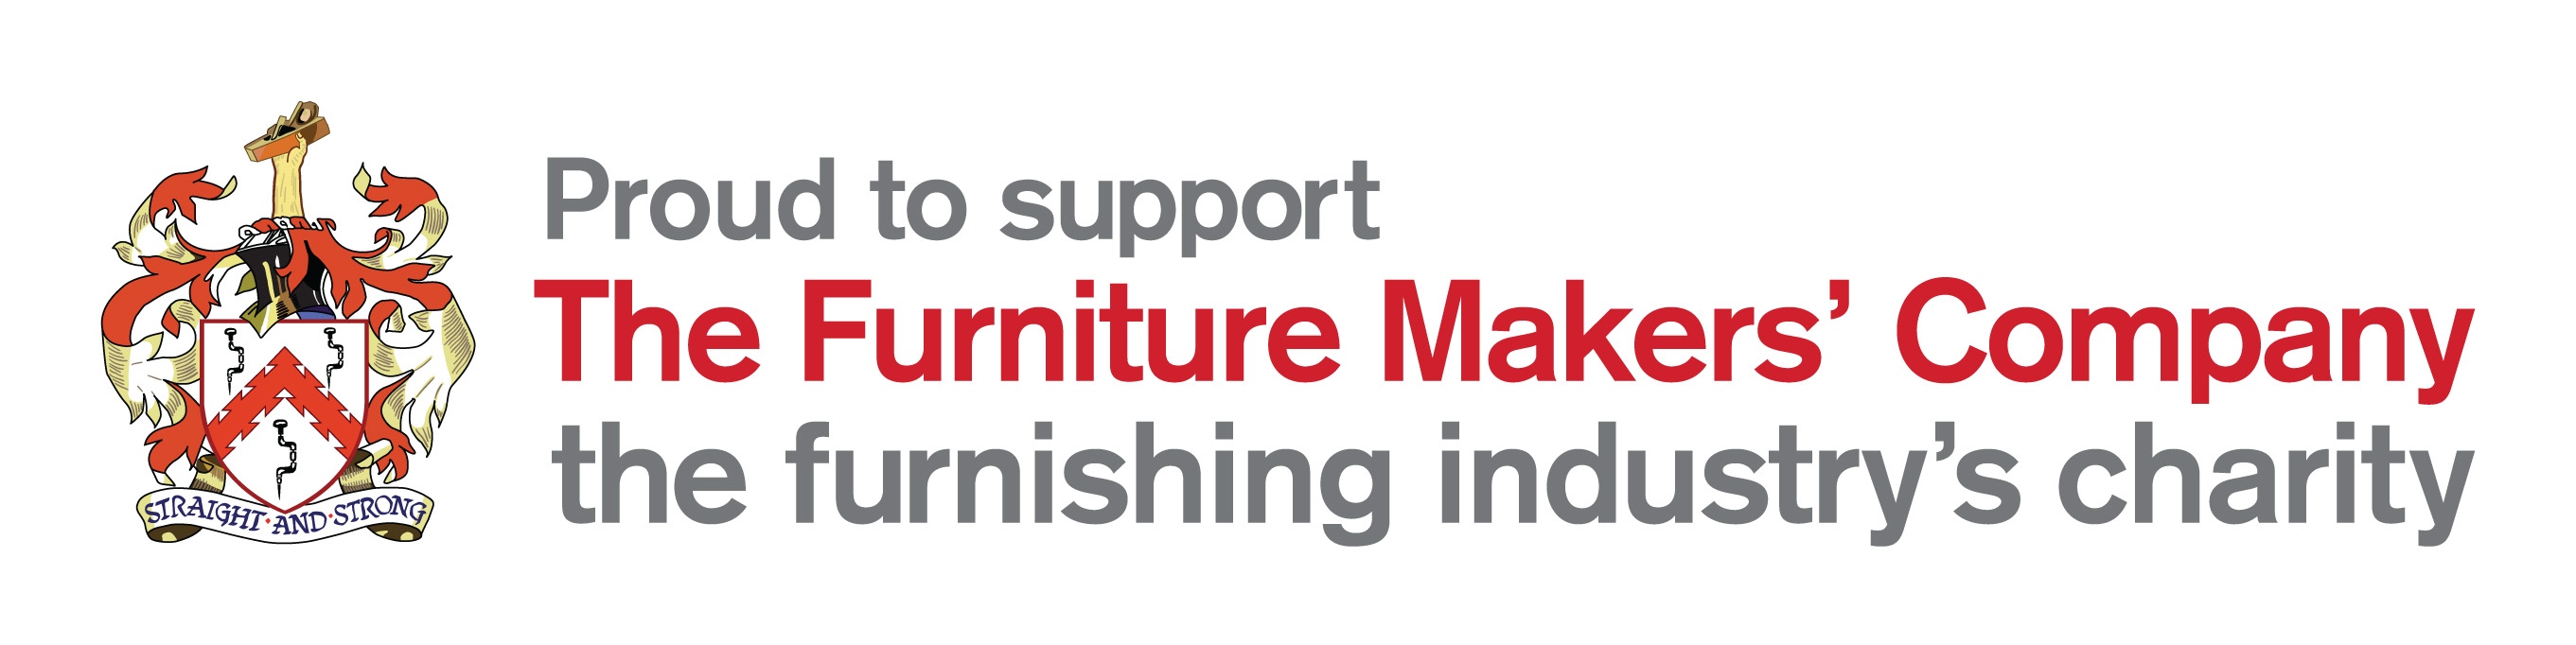 The Furniture Makers Company